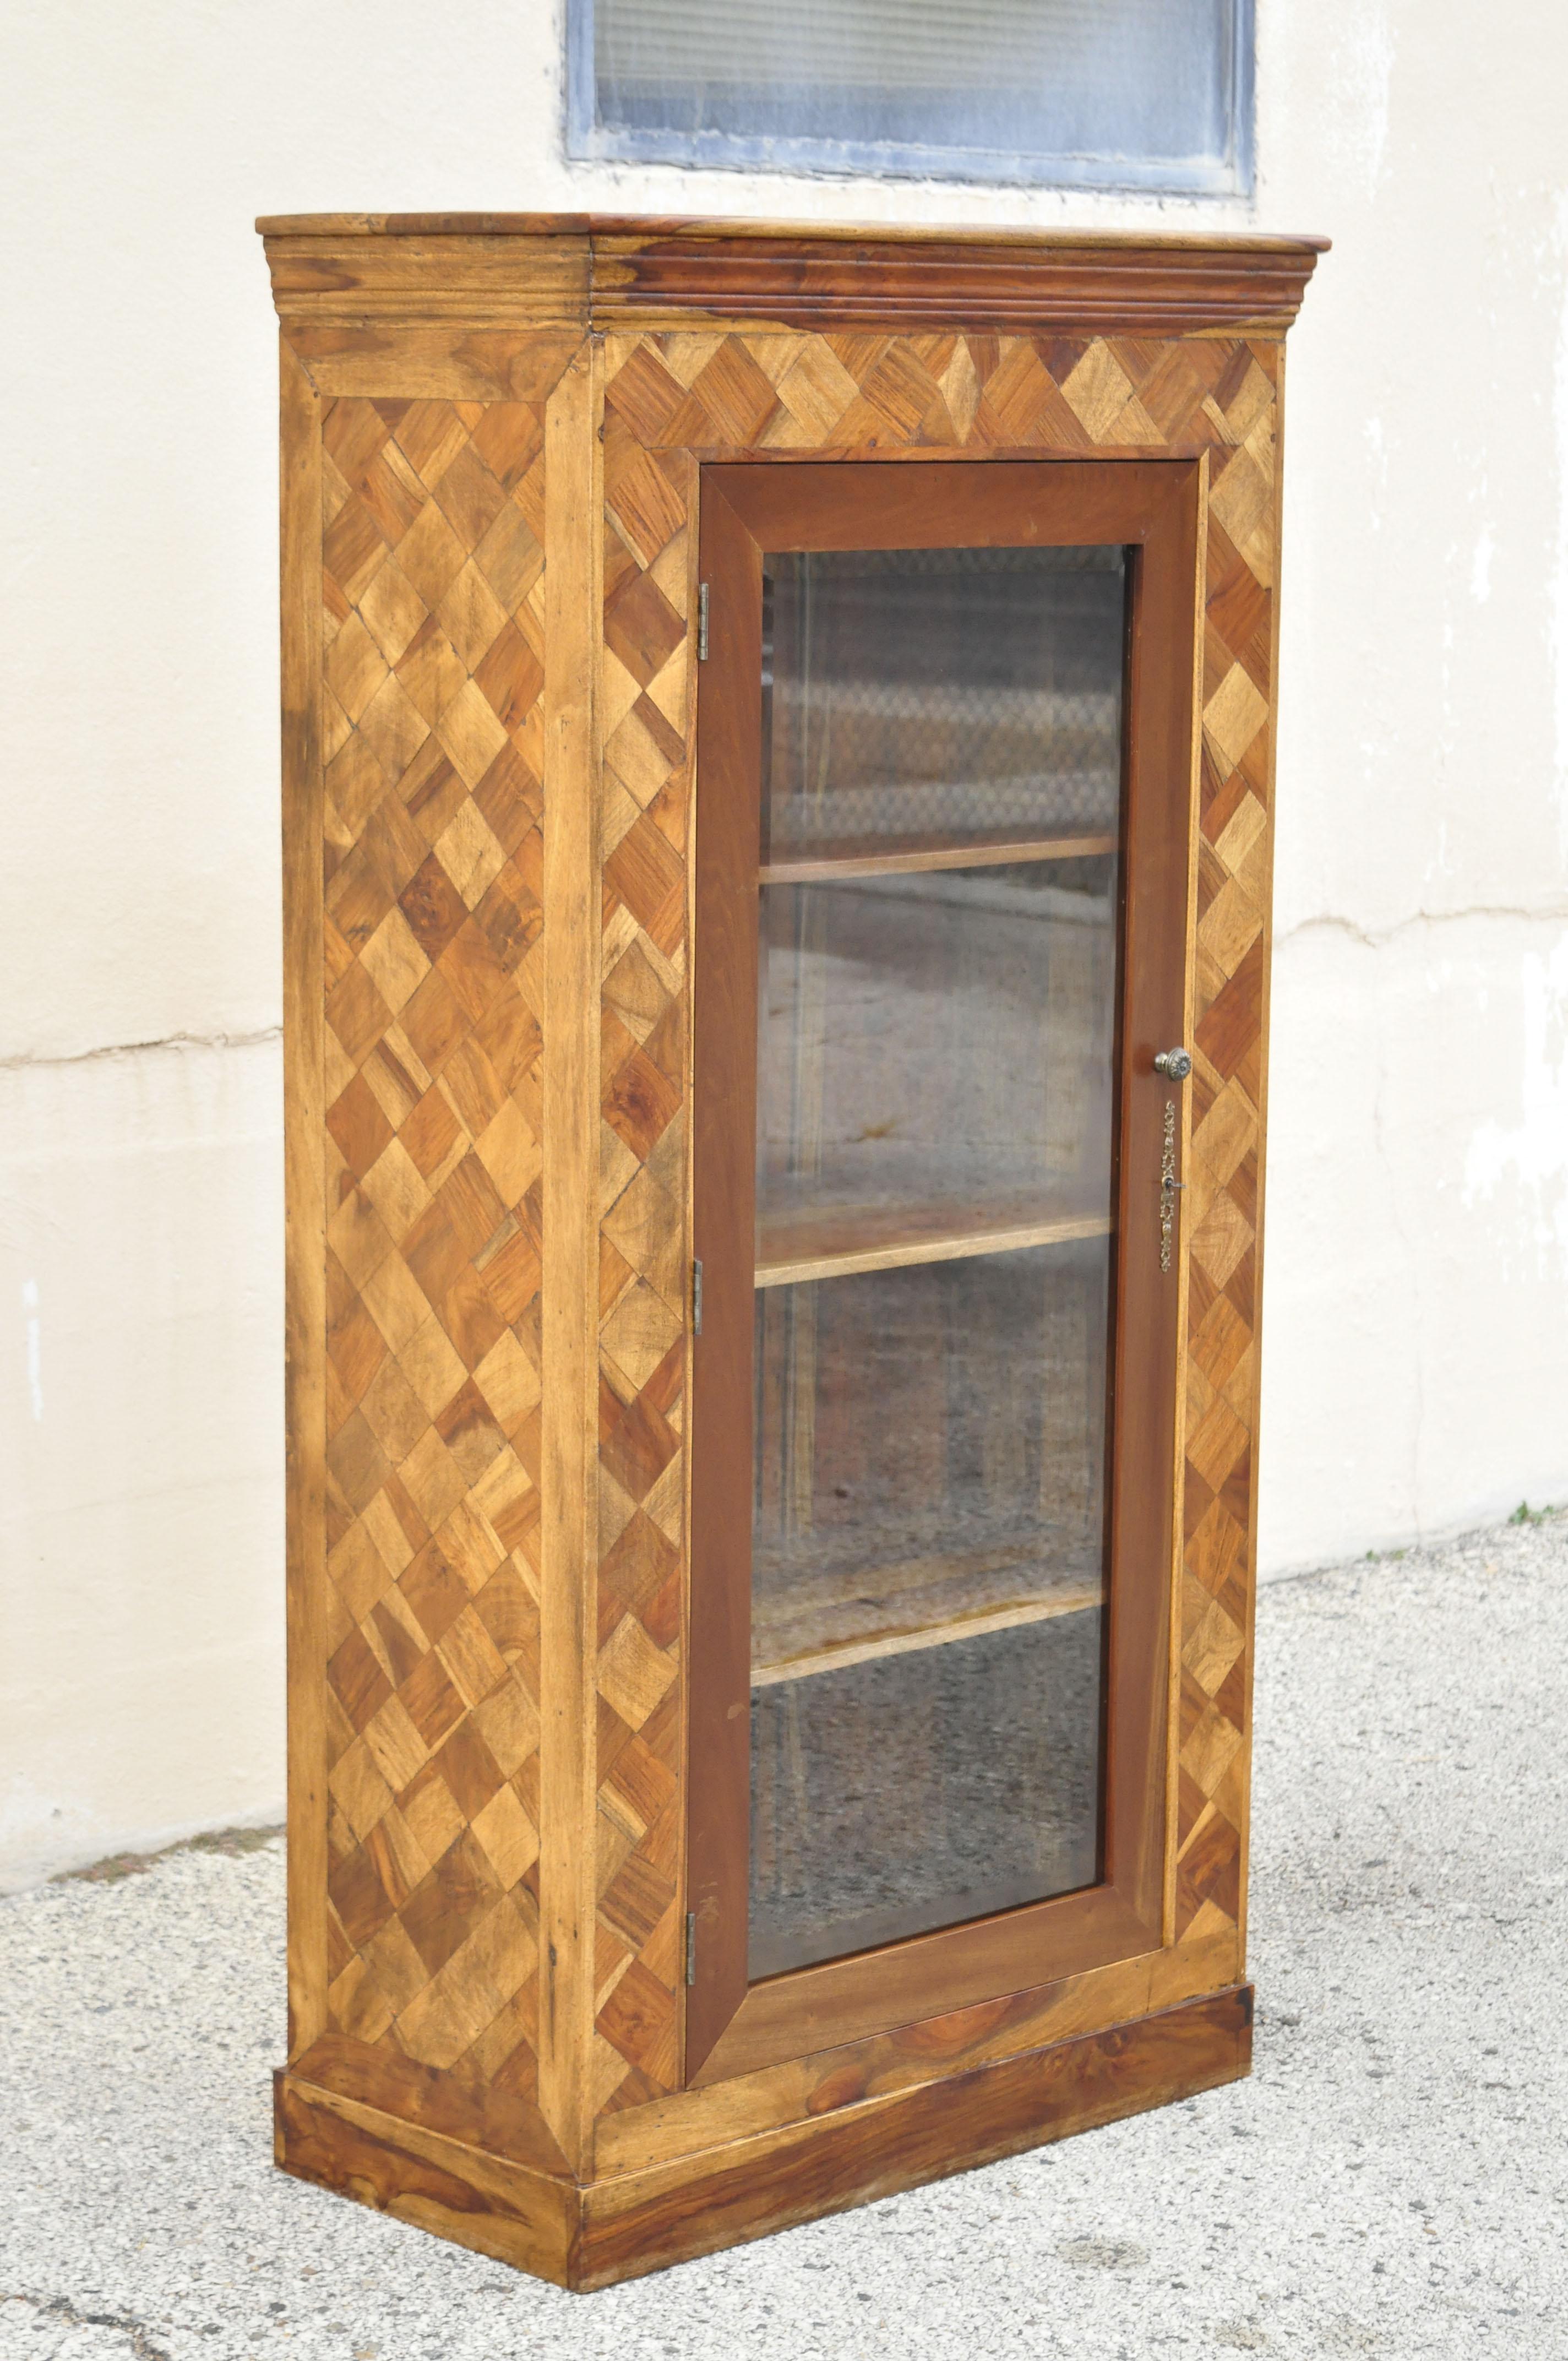 Marquetry geometric inlay mixed wood one drawer bookcase display cabinet curio. Item features stunning marquetry inlay wooden case, with diamond cut geometric pattern, solid wood construction, beautiful wood grain, 1 glass swing door, working lock